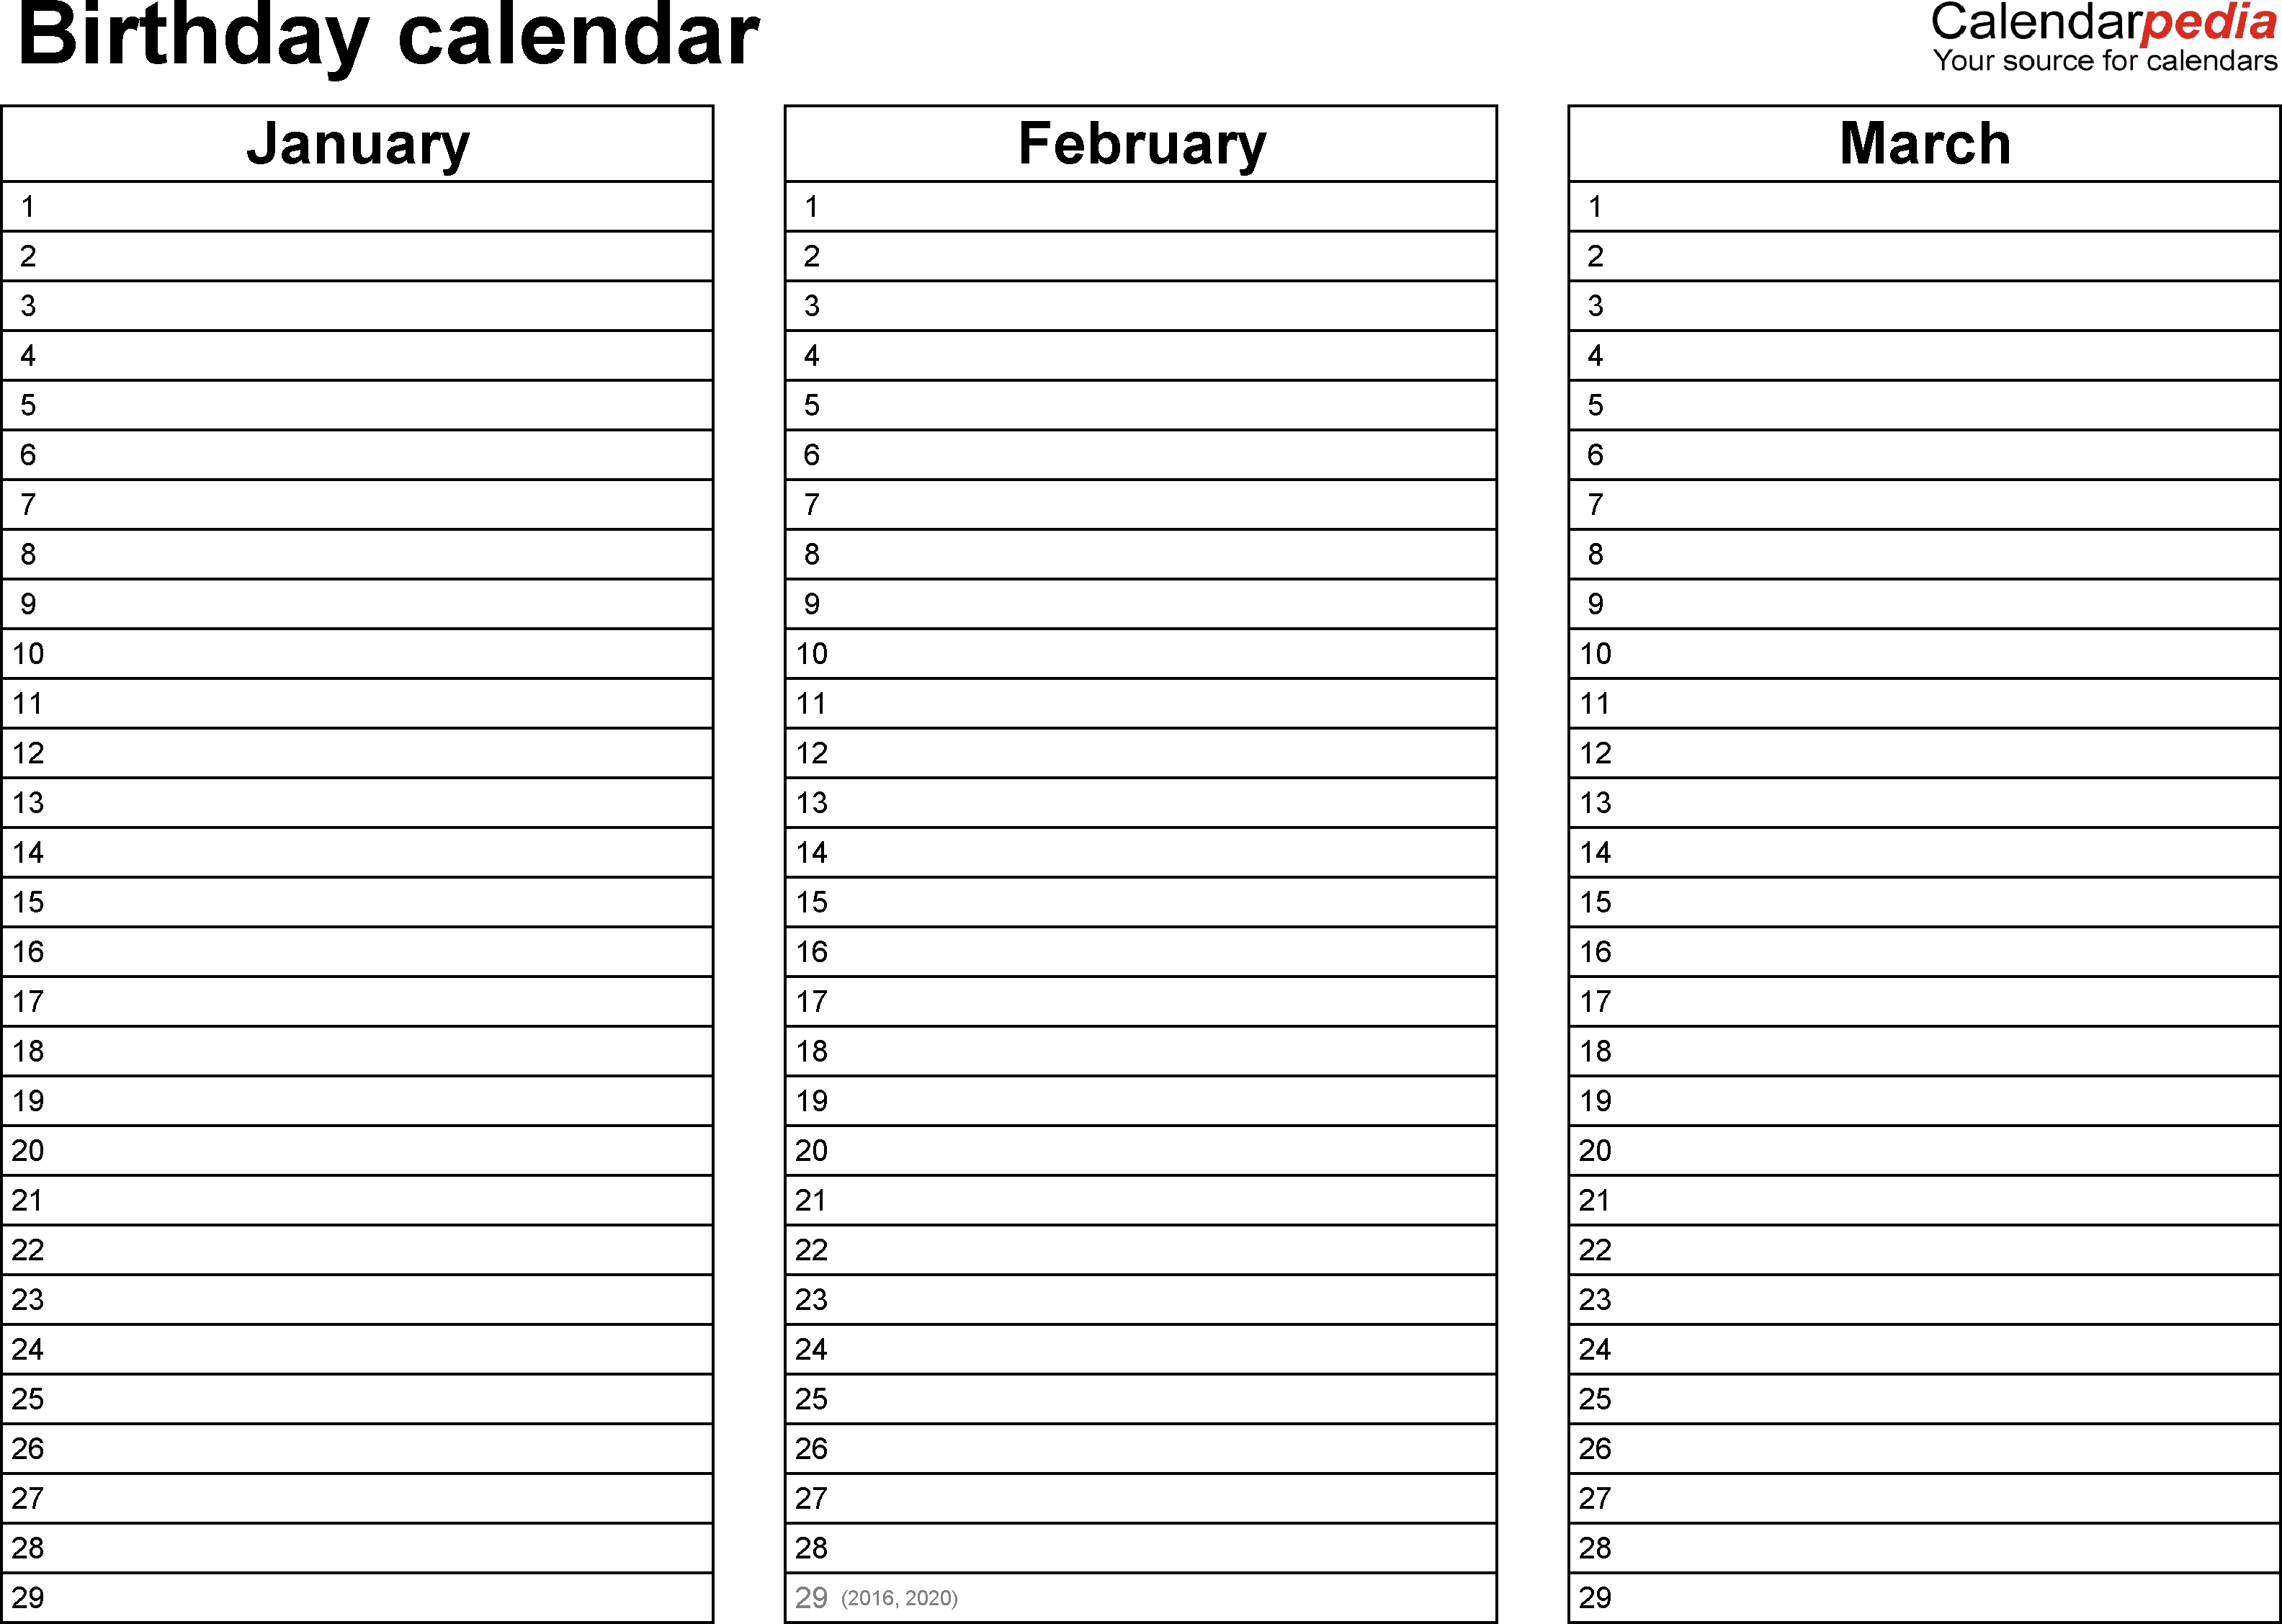 Birthday Calendars - 7 Free Printable Excel Templates with regard to Free 12 Month Birthday Calendar Template